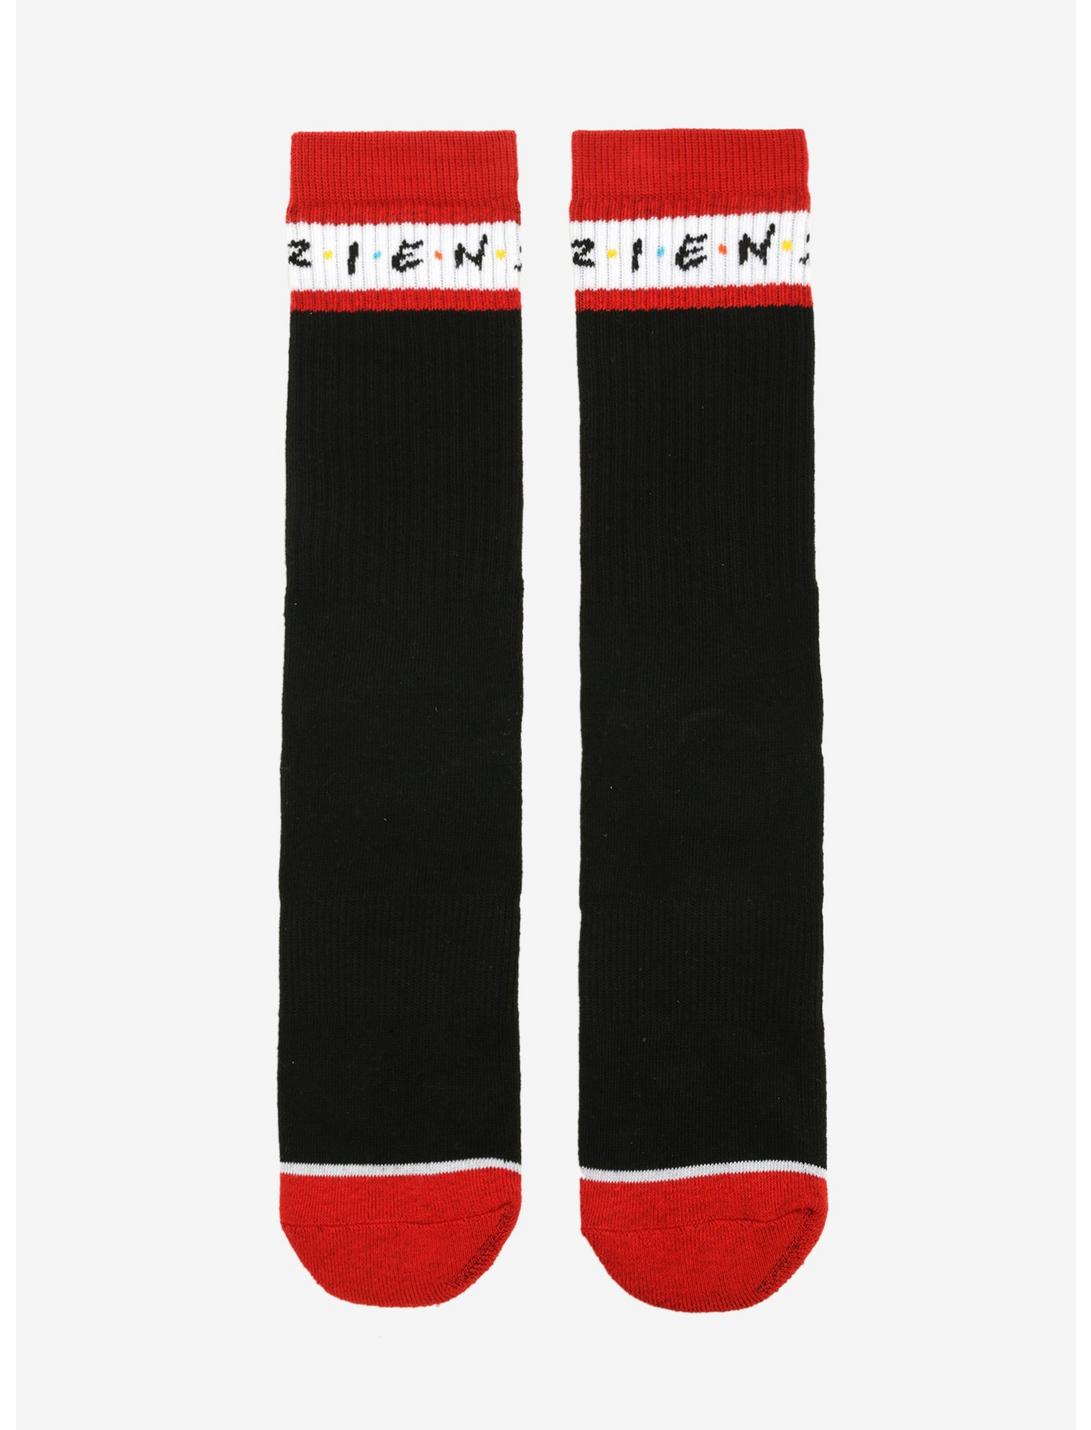 Friends All Around Logo Socks - BoxLunch Exclusive, , hi-res